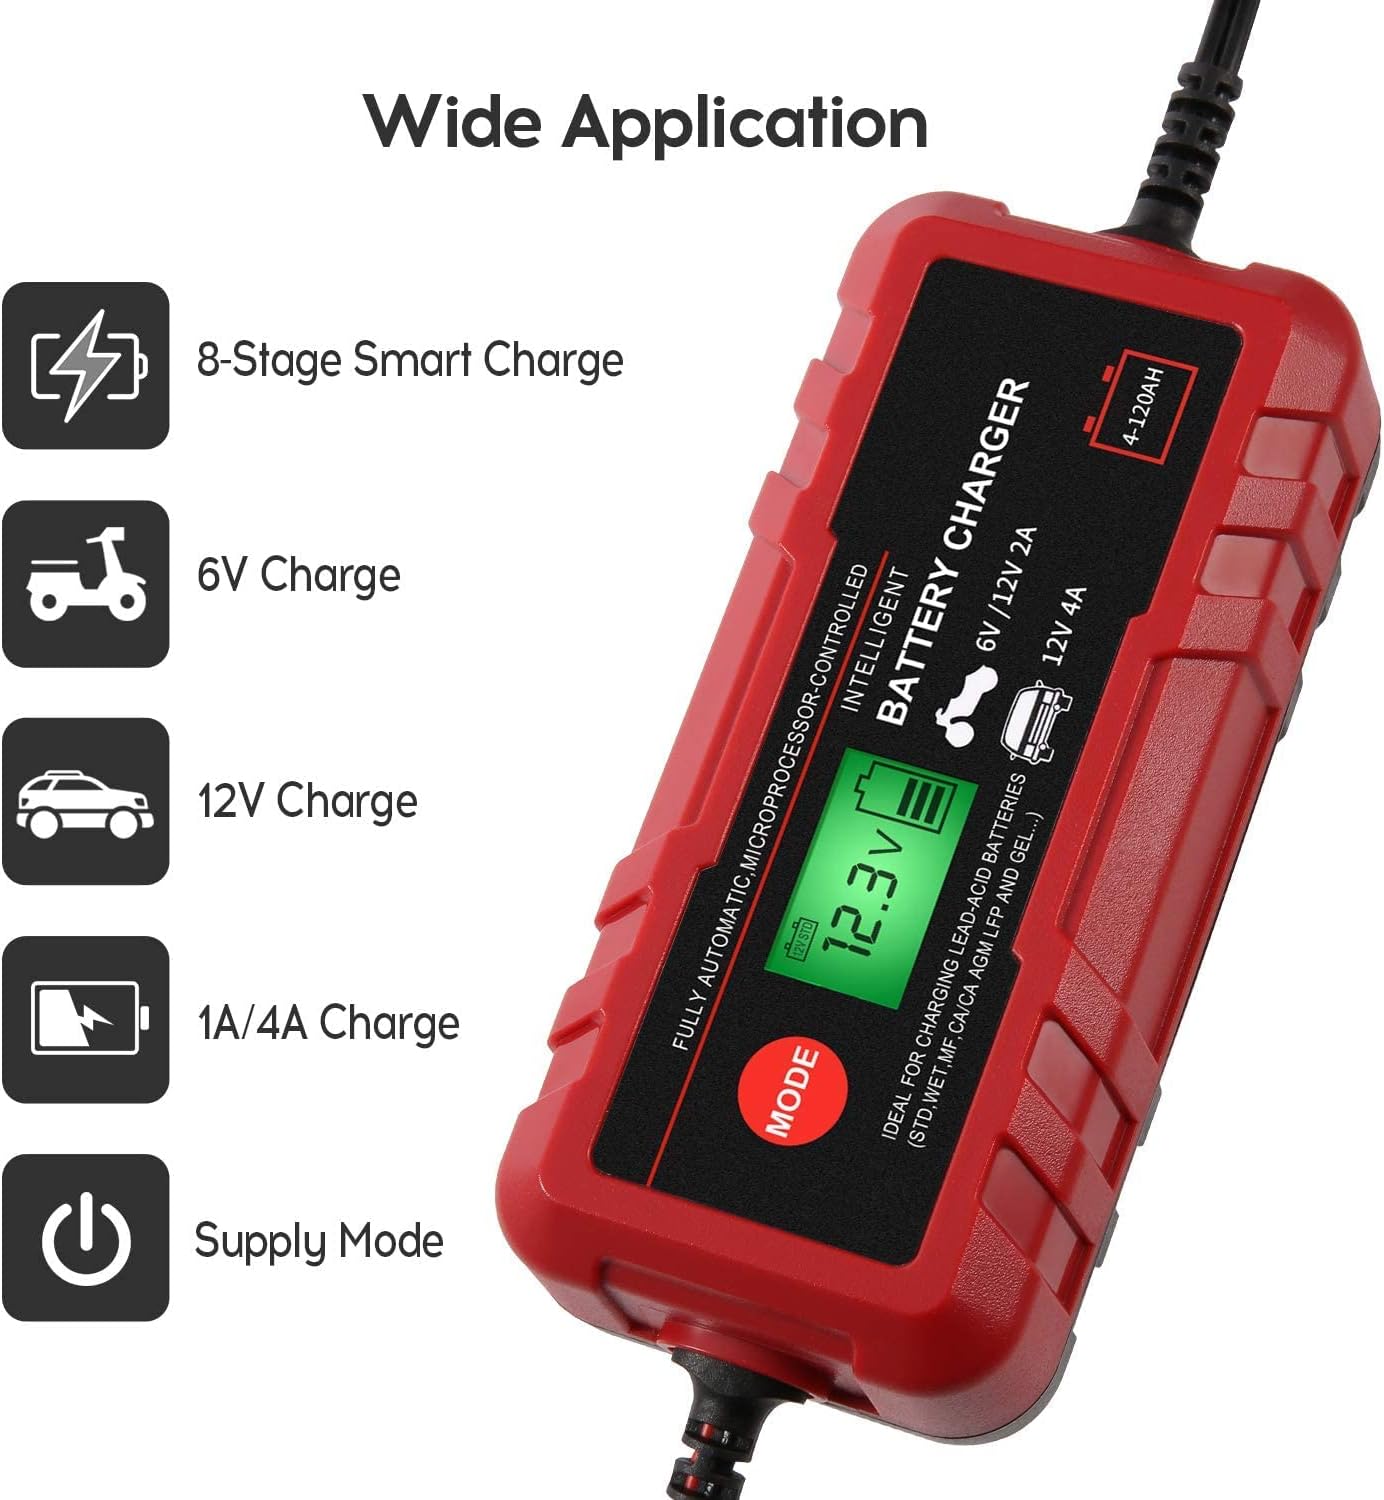 Sailnovo 4A Smart Car Battery Charger Review